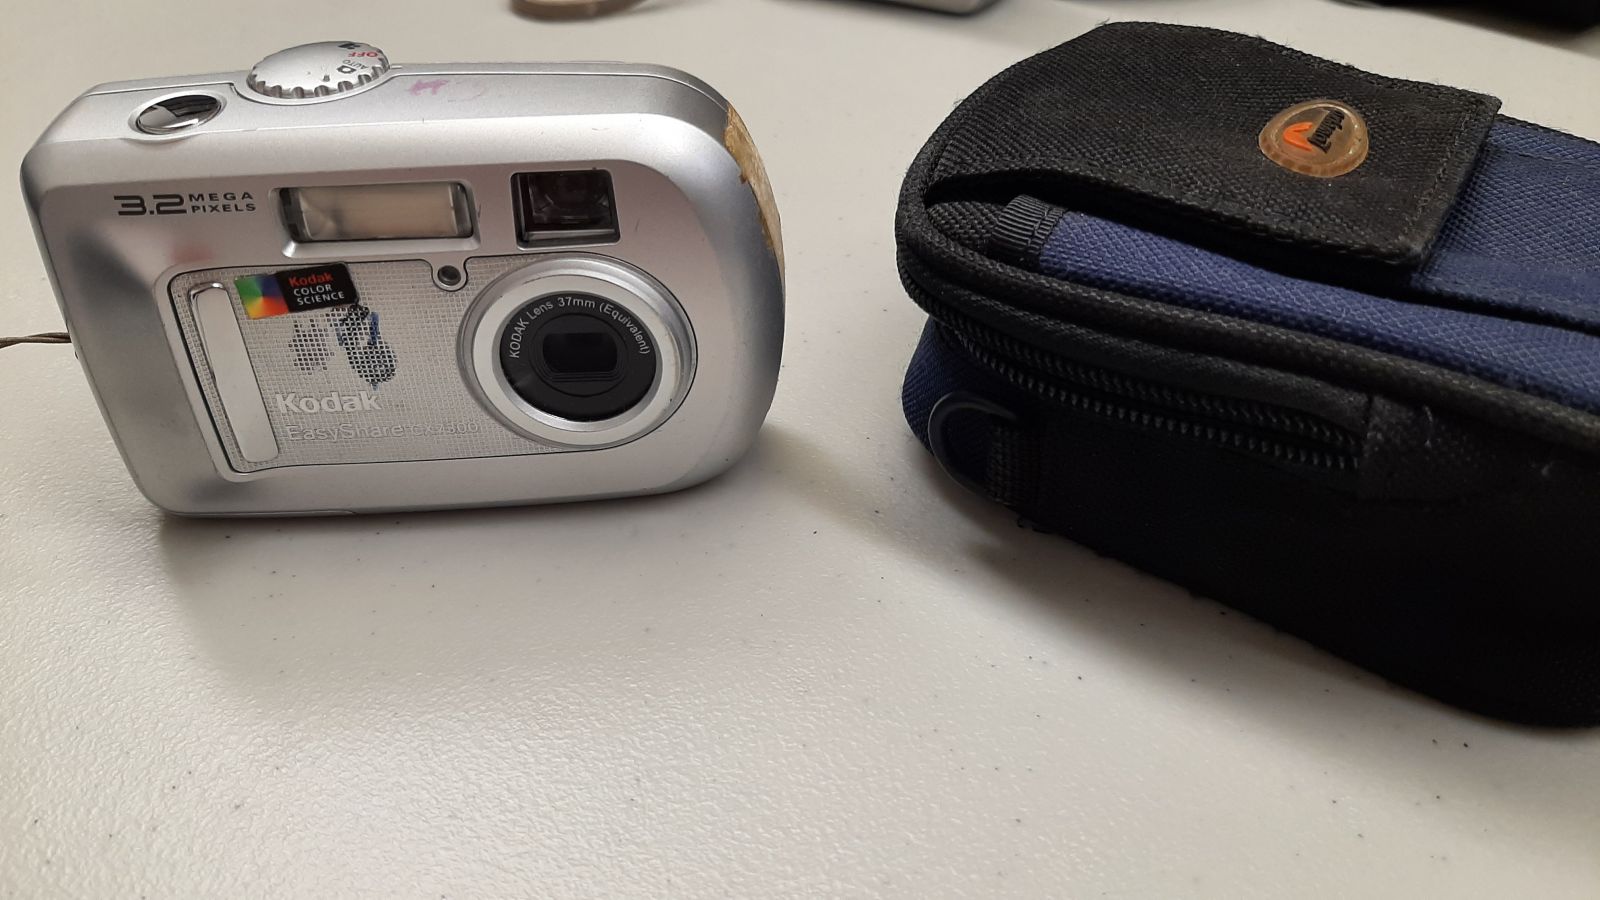 An image of a digital camera and case.